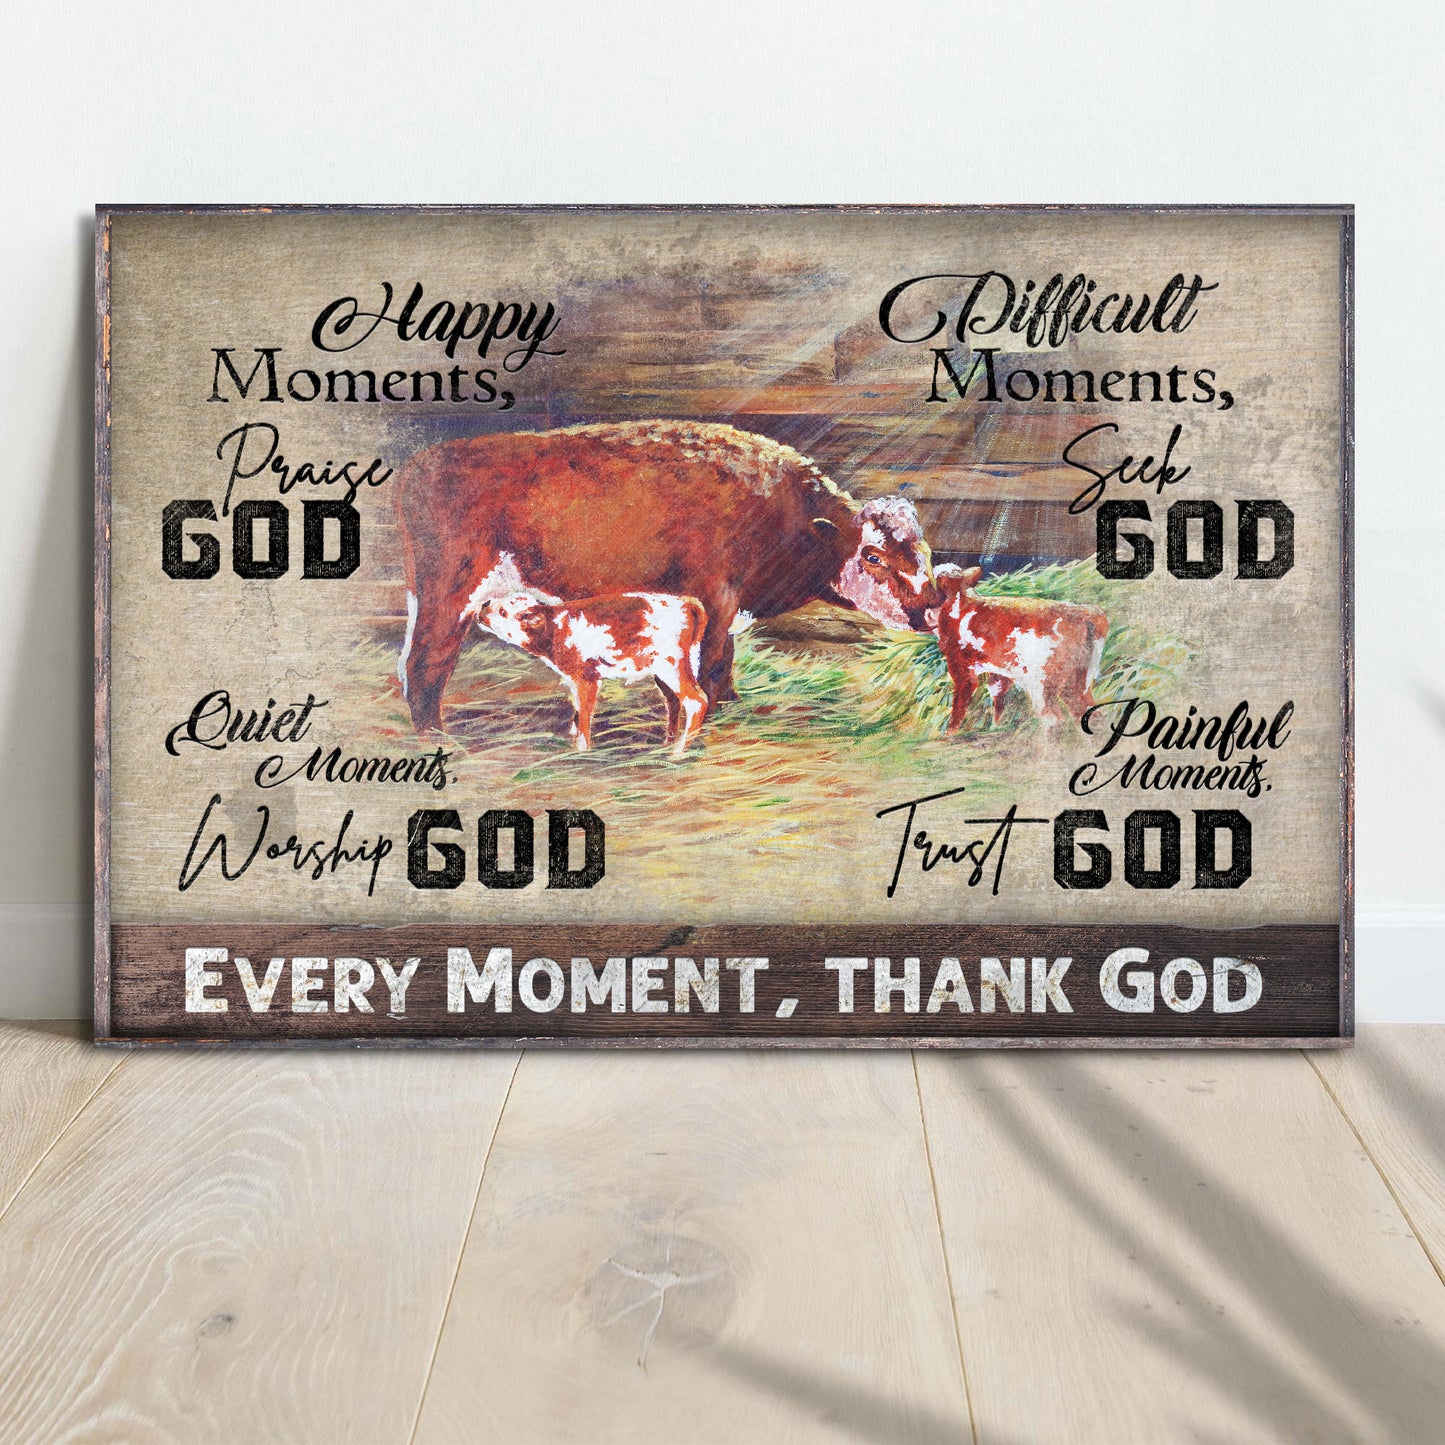 Every Moment Thank God - Image by Tailored Canvases